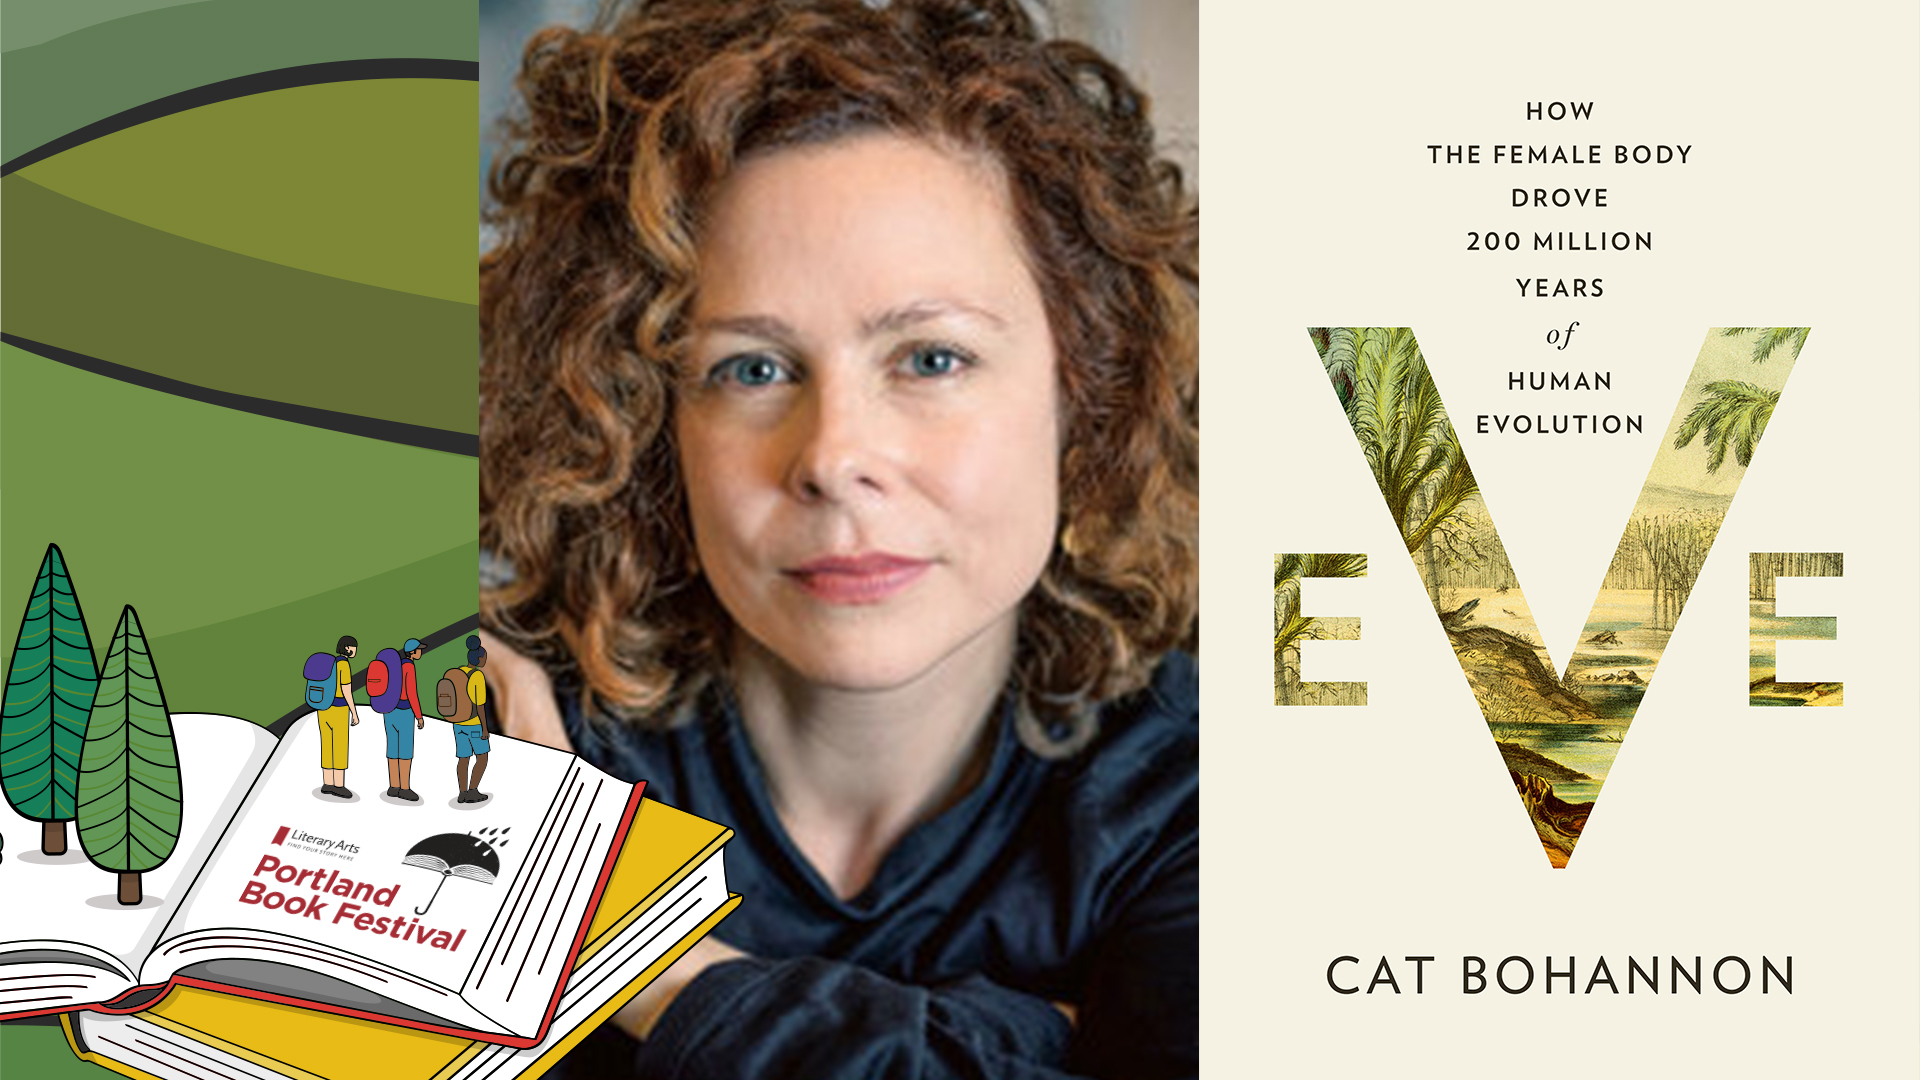 In Eve, by Cat Bohannon, Revisiting 200 Million Years of the